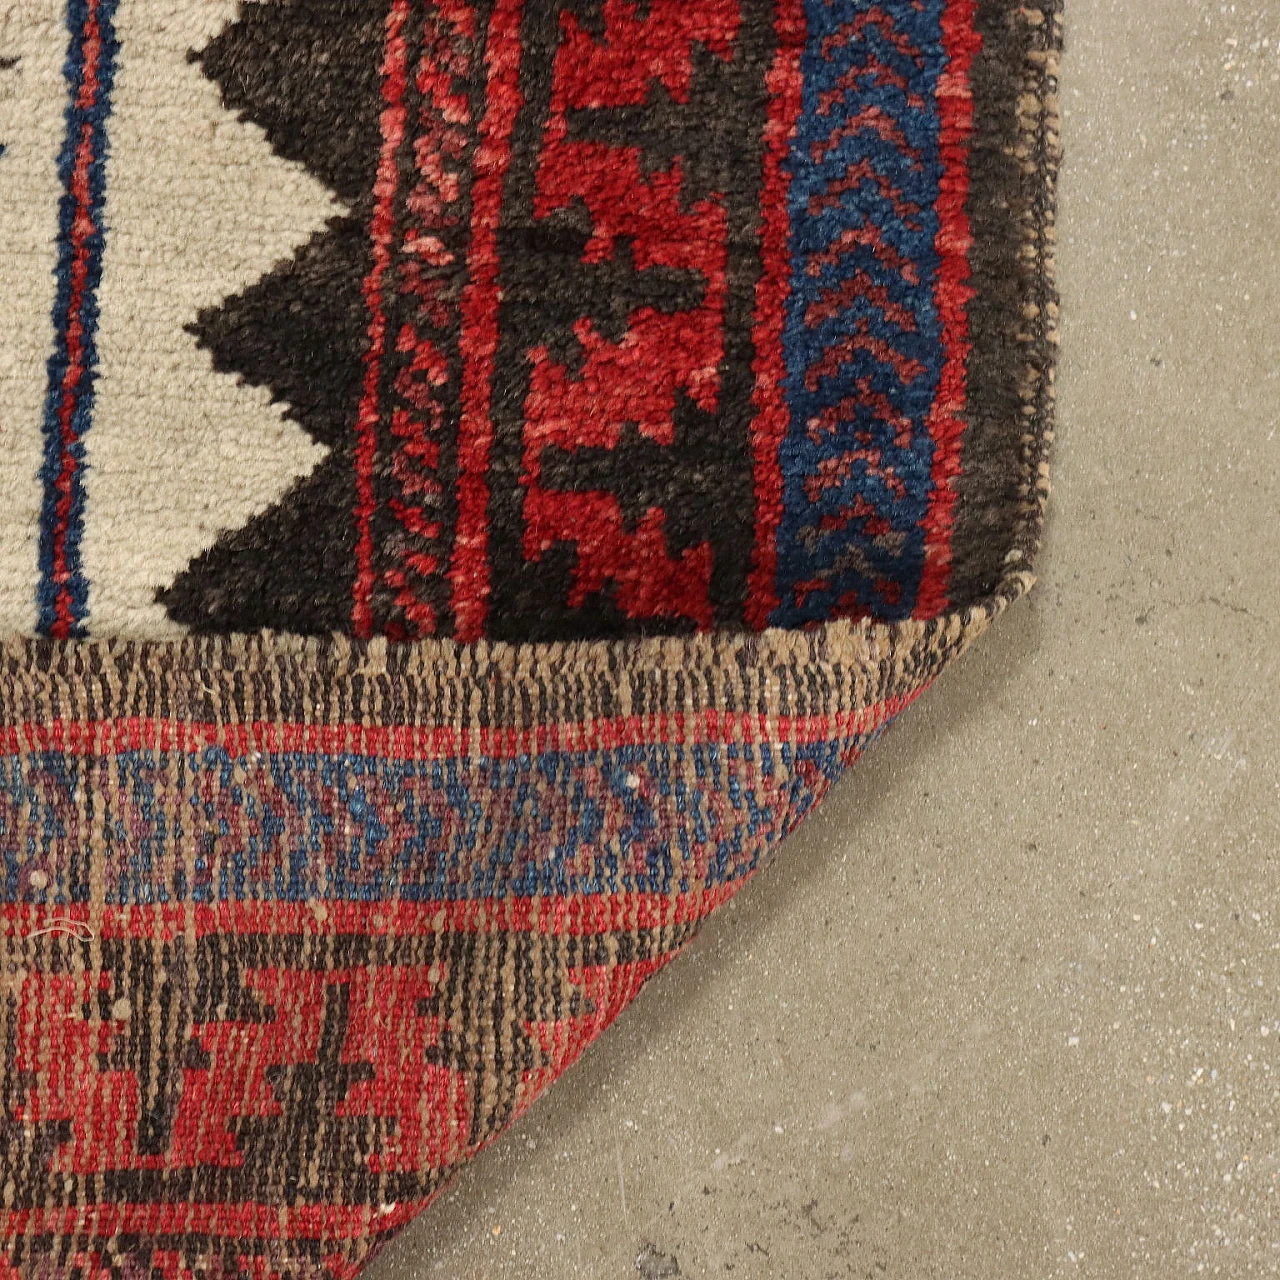 Iranian red, blue and beige wool Beluchi rug 7